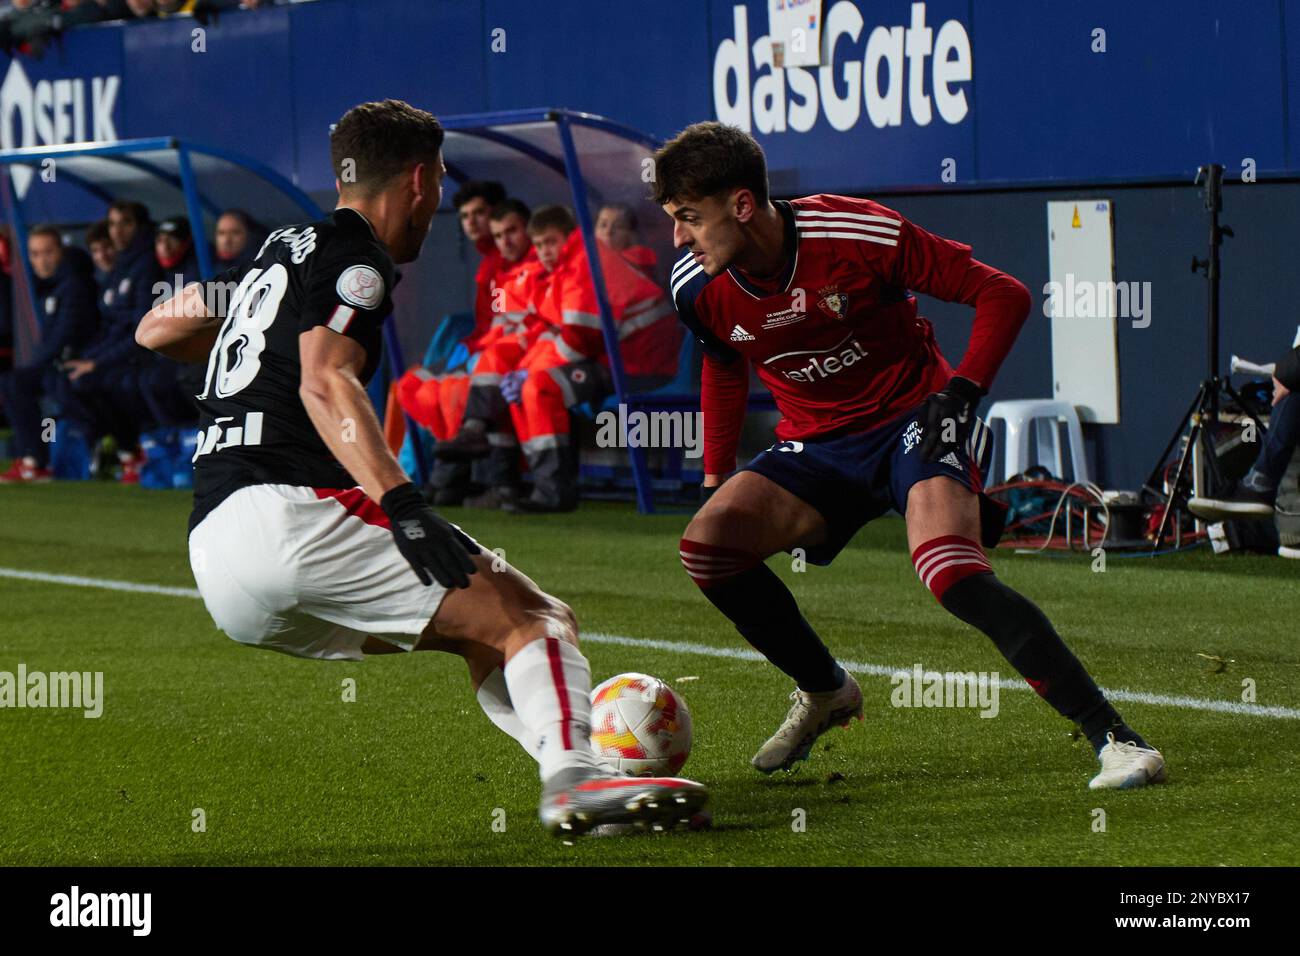 Pamplona, Spain. 1st Mar. 2023. Sports. Football/Soccer. De Marcos (18. Athletic Club) and Aimar Oroz (22. CA Osasuna) during the first leg football match of the semifinal of the Copa del Rey between CA Osasuna and Athletic Club played at El Sadar stadium in Pamplona (Spain) on March 1, 2023. Credit: Iñigo Alzugaray/Alamy Live News Stock Photo